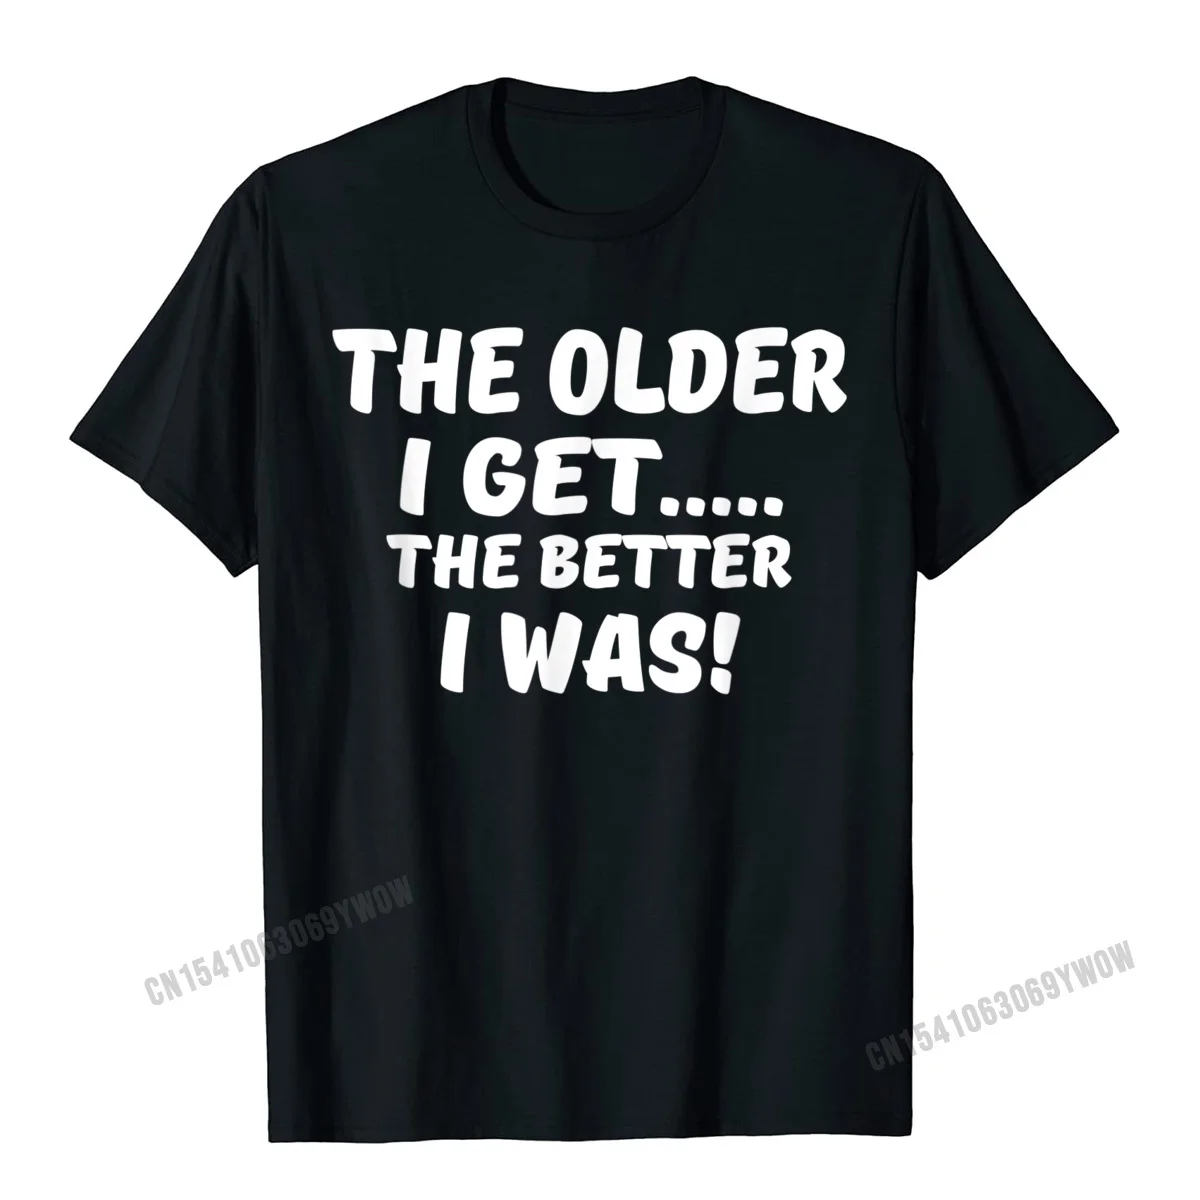 

The Older I Get The Better I Was Funny Old Age T-Shirt Camisas Men Brand New Mens Top T-Shirts Casual Tops Tees Cotton Gift